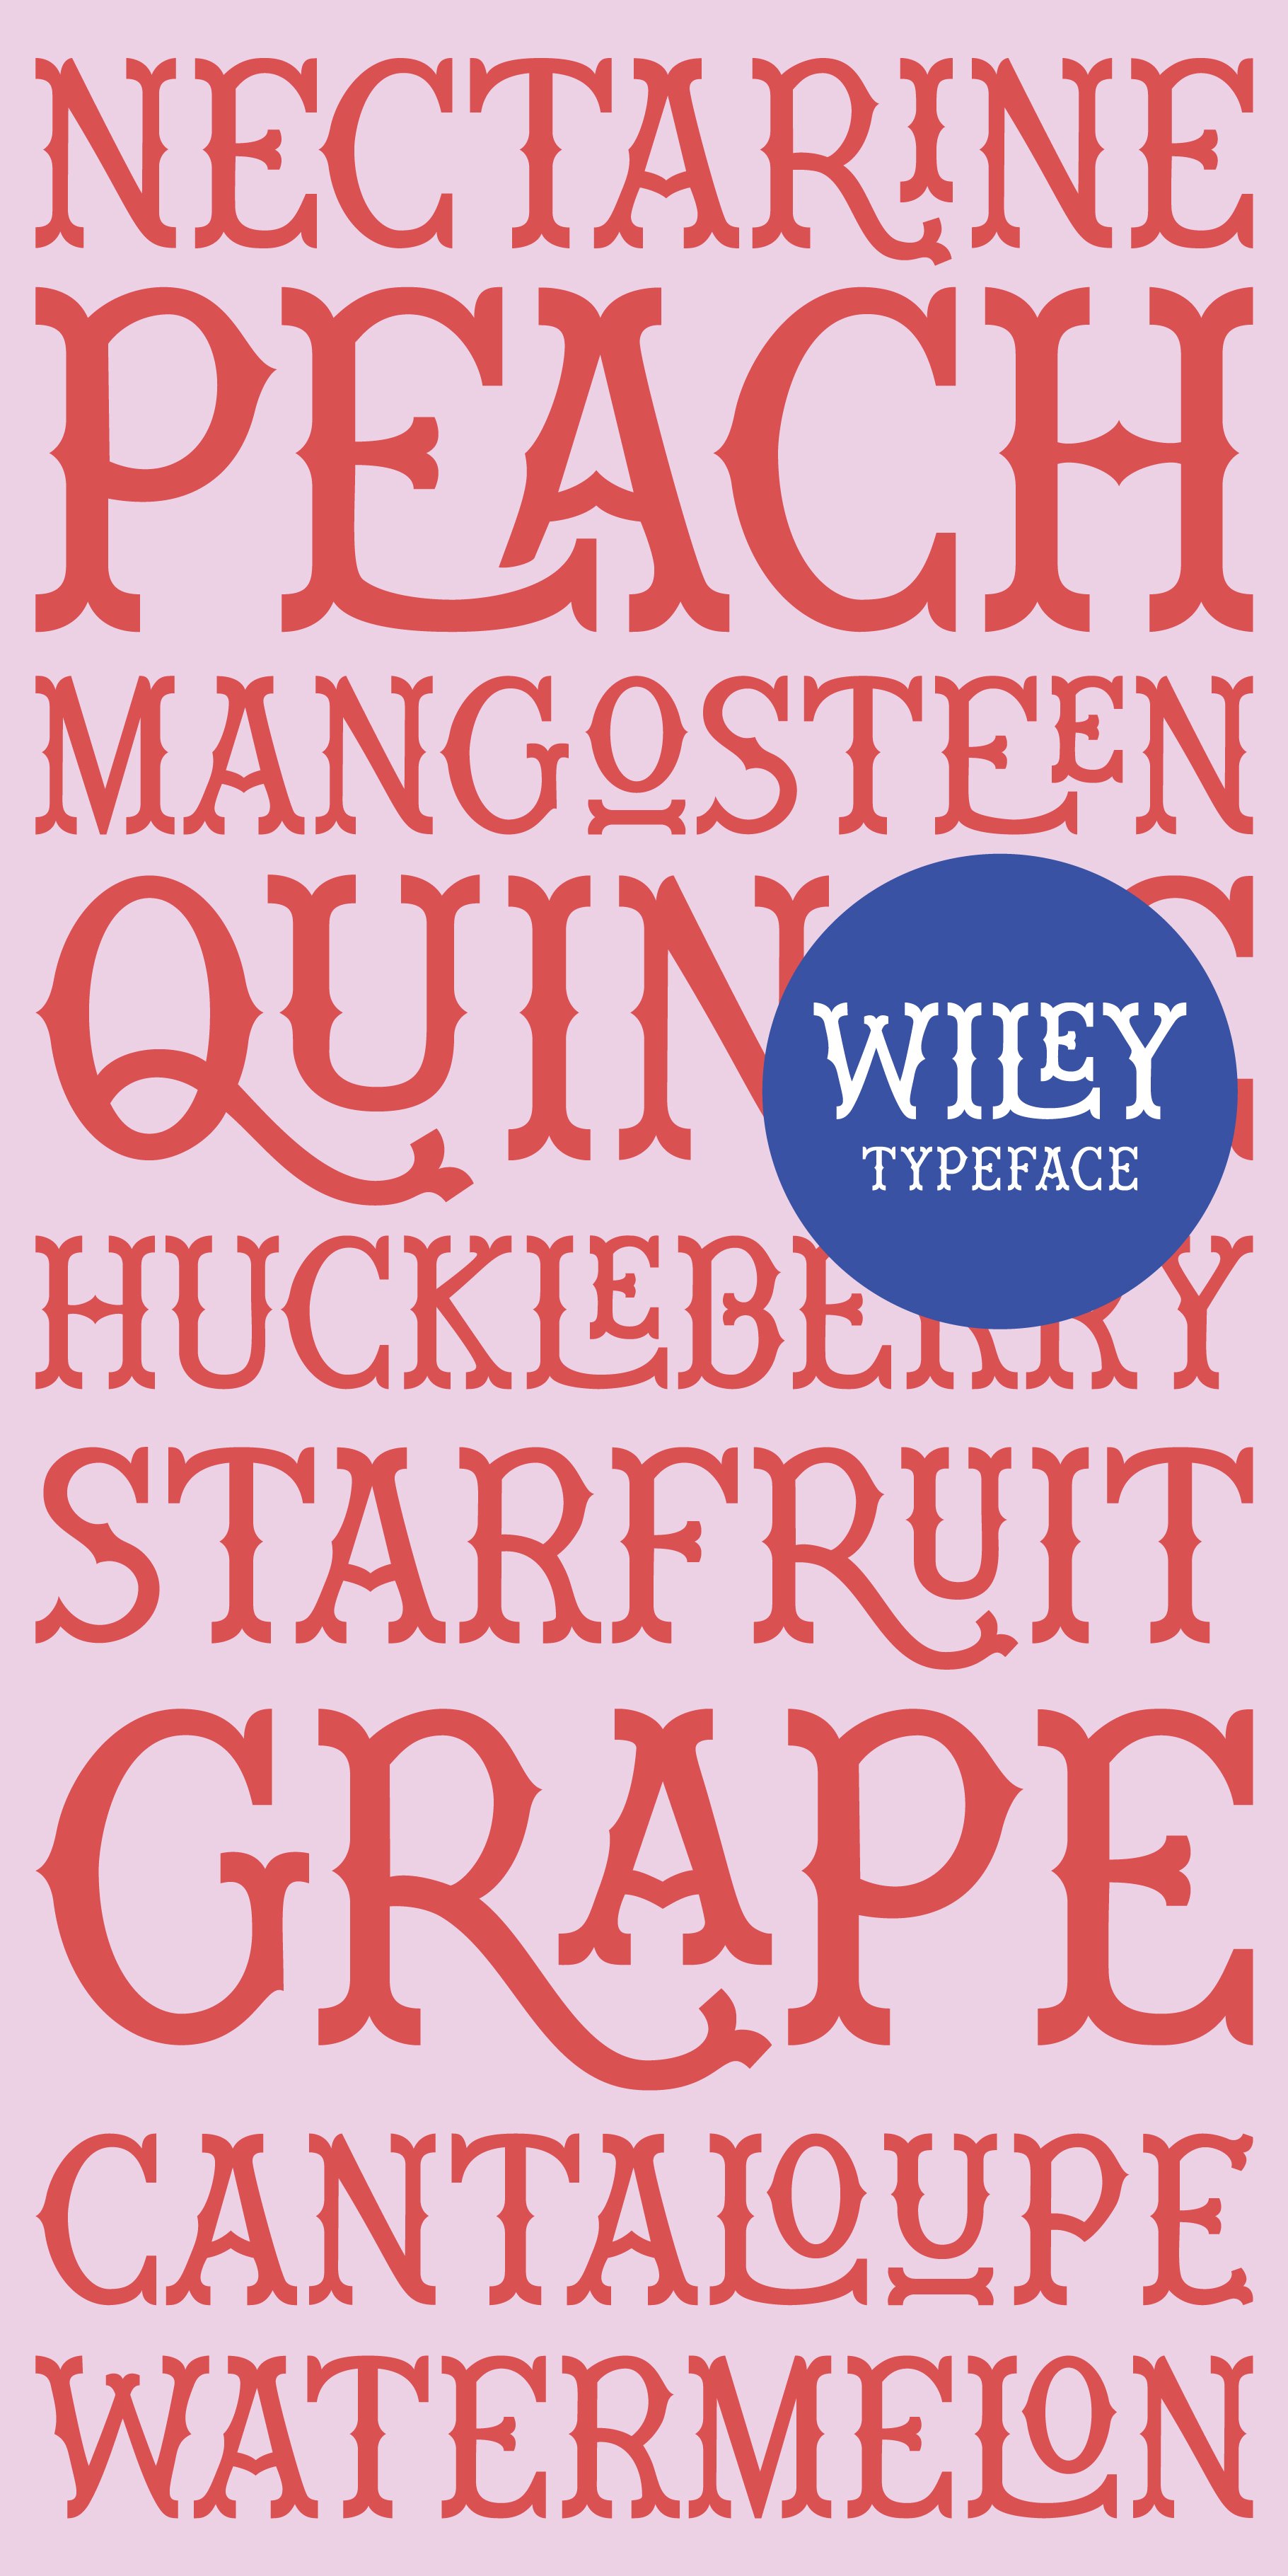 wiley font molly suber thorpe 17 417